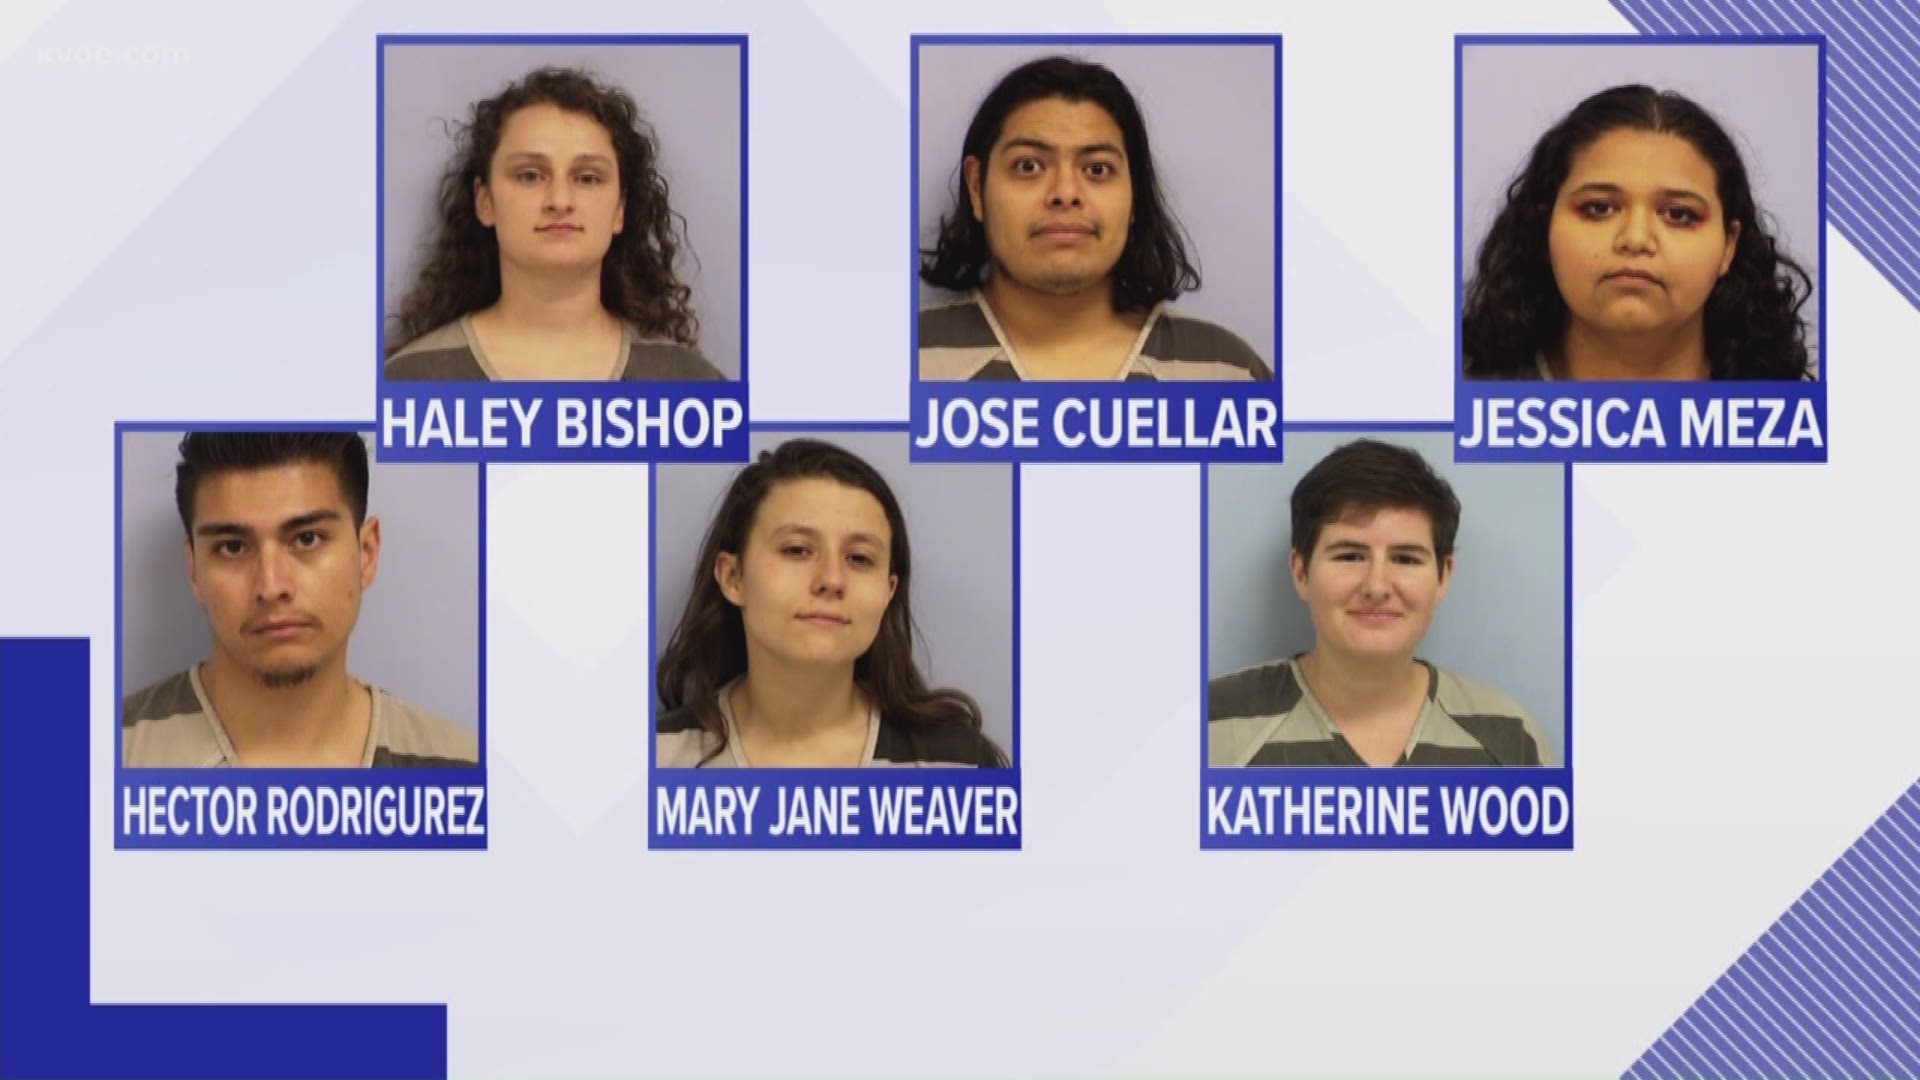 Seven people were arrested Thursday evening for banging on the windows of City Hall and disrupting the council meeting.